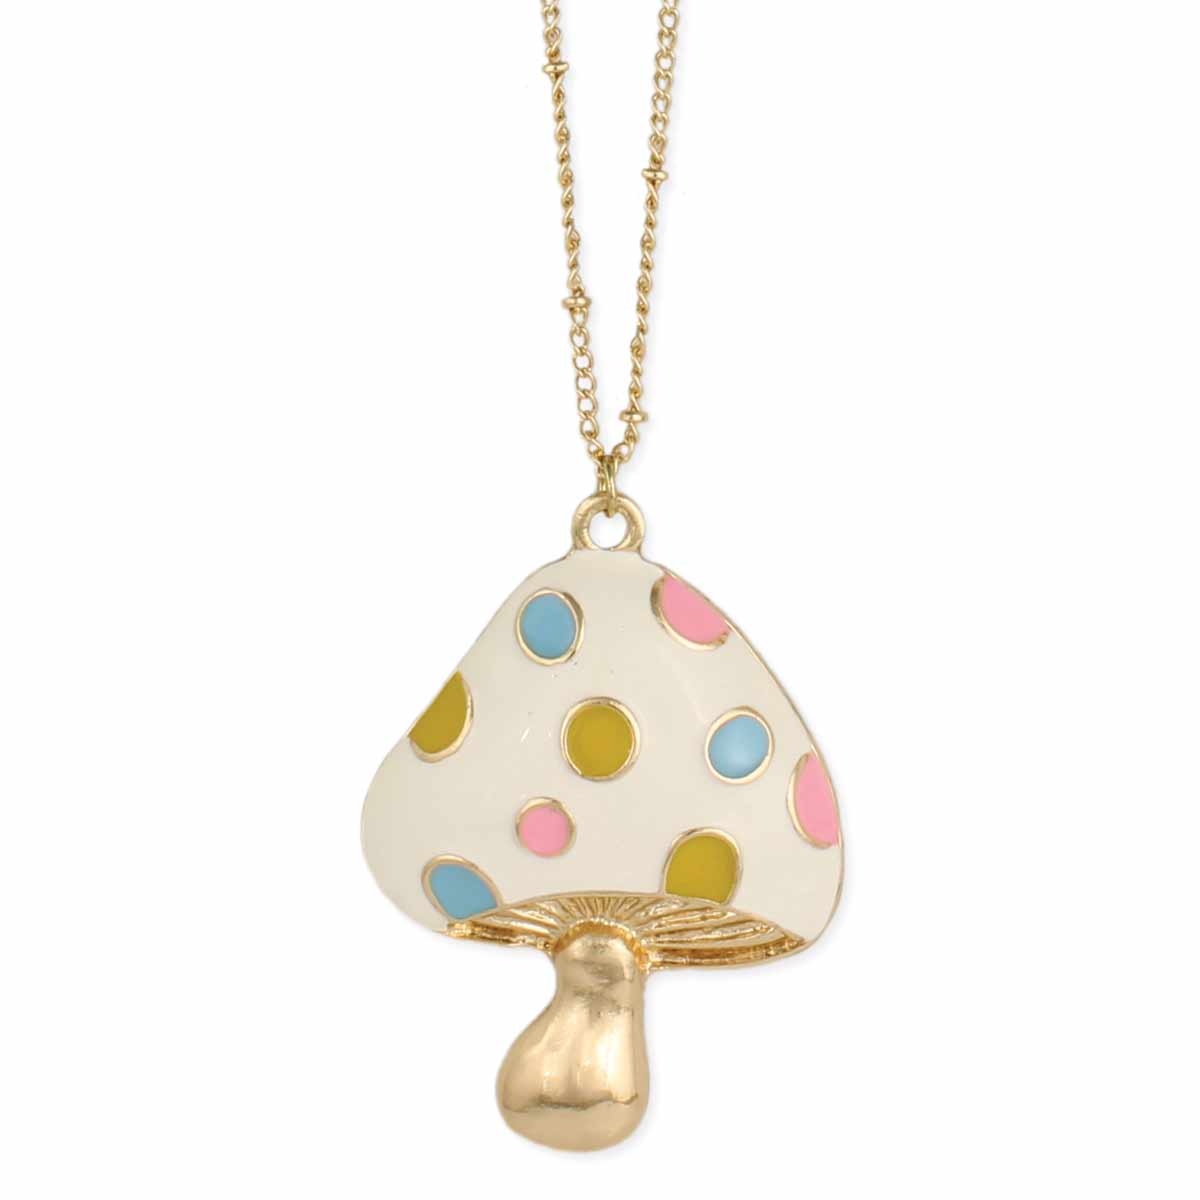 enameled gold mushroom pendant with cream, blue, yellow, and pink details on a delicate gold bead and link metal chain